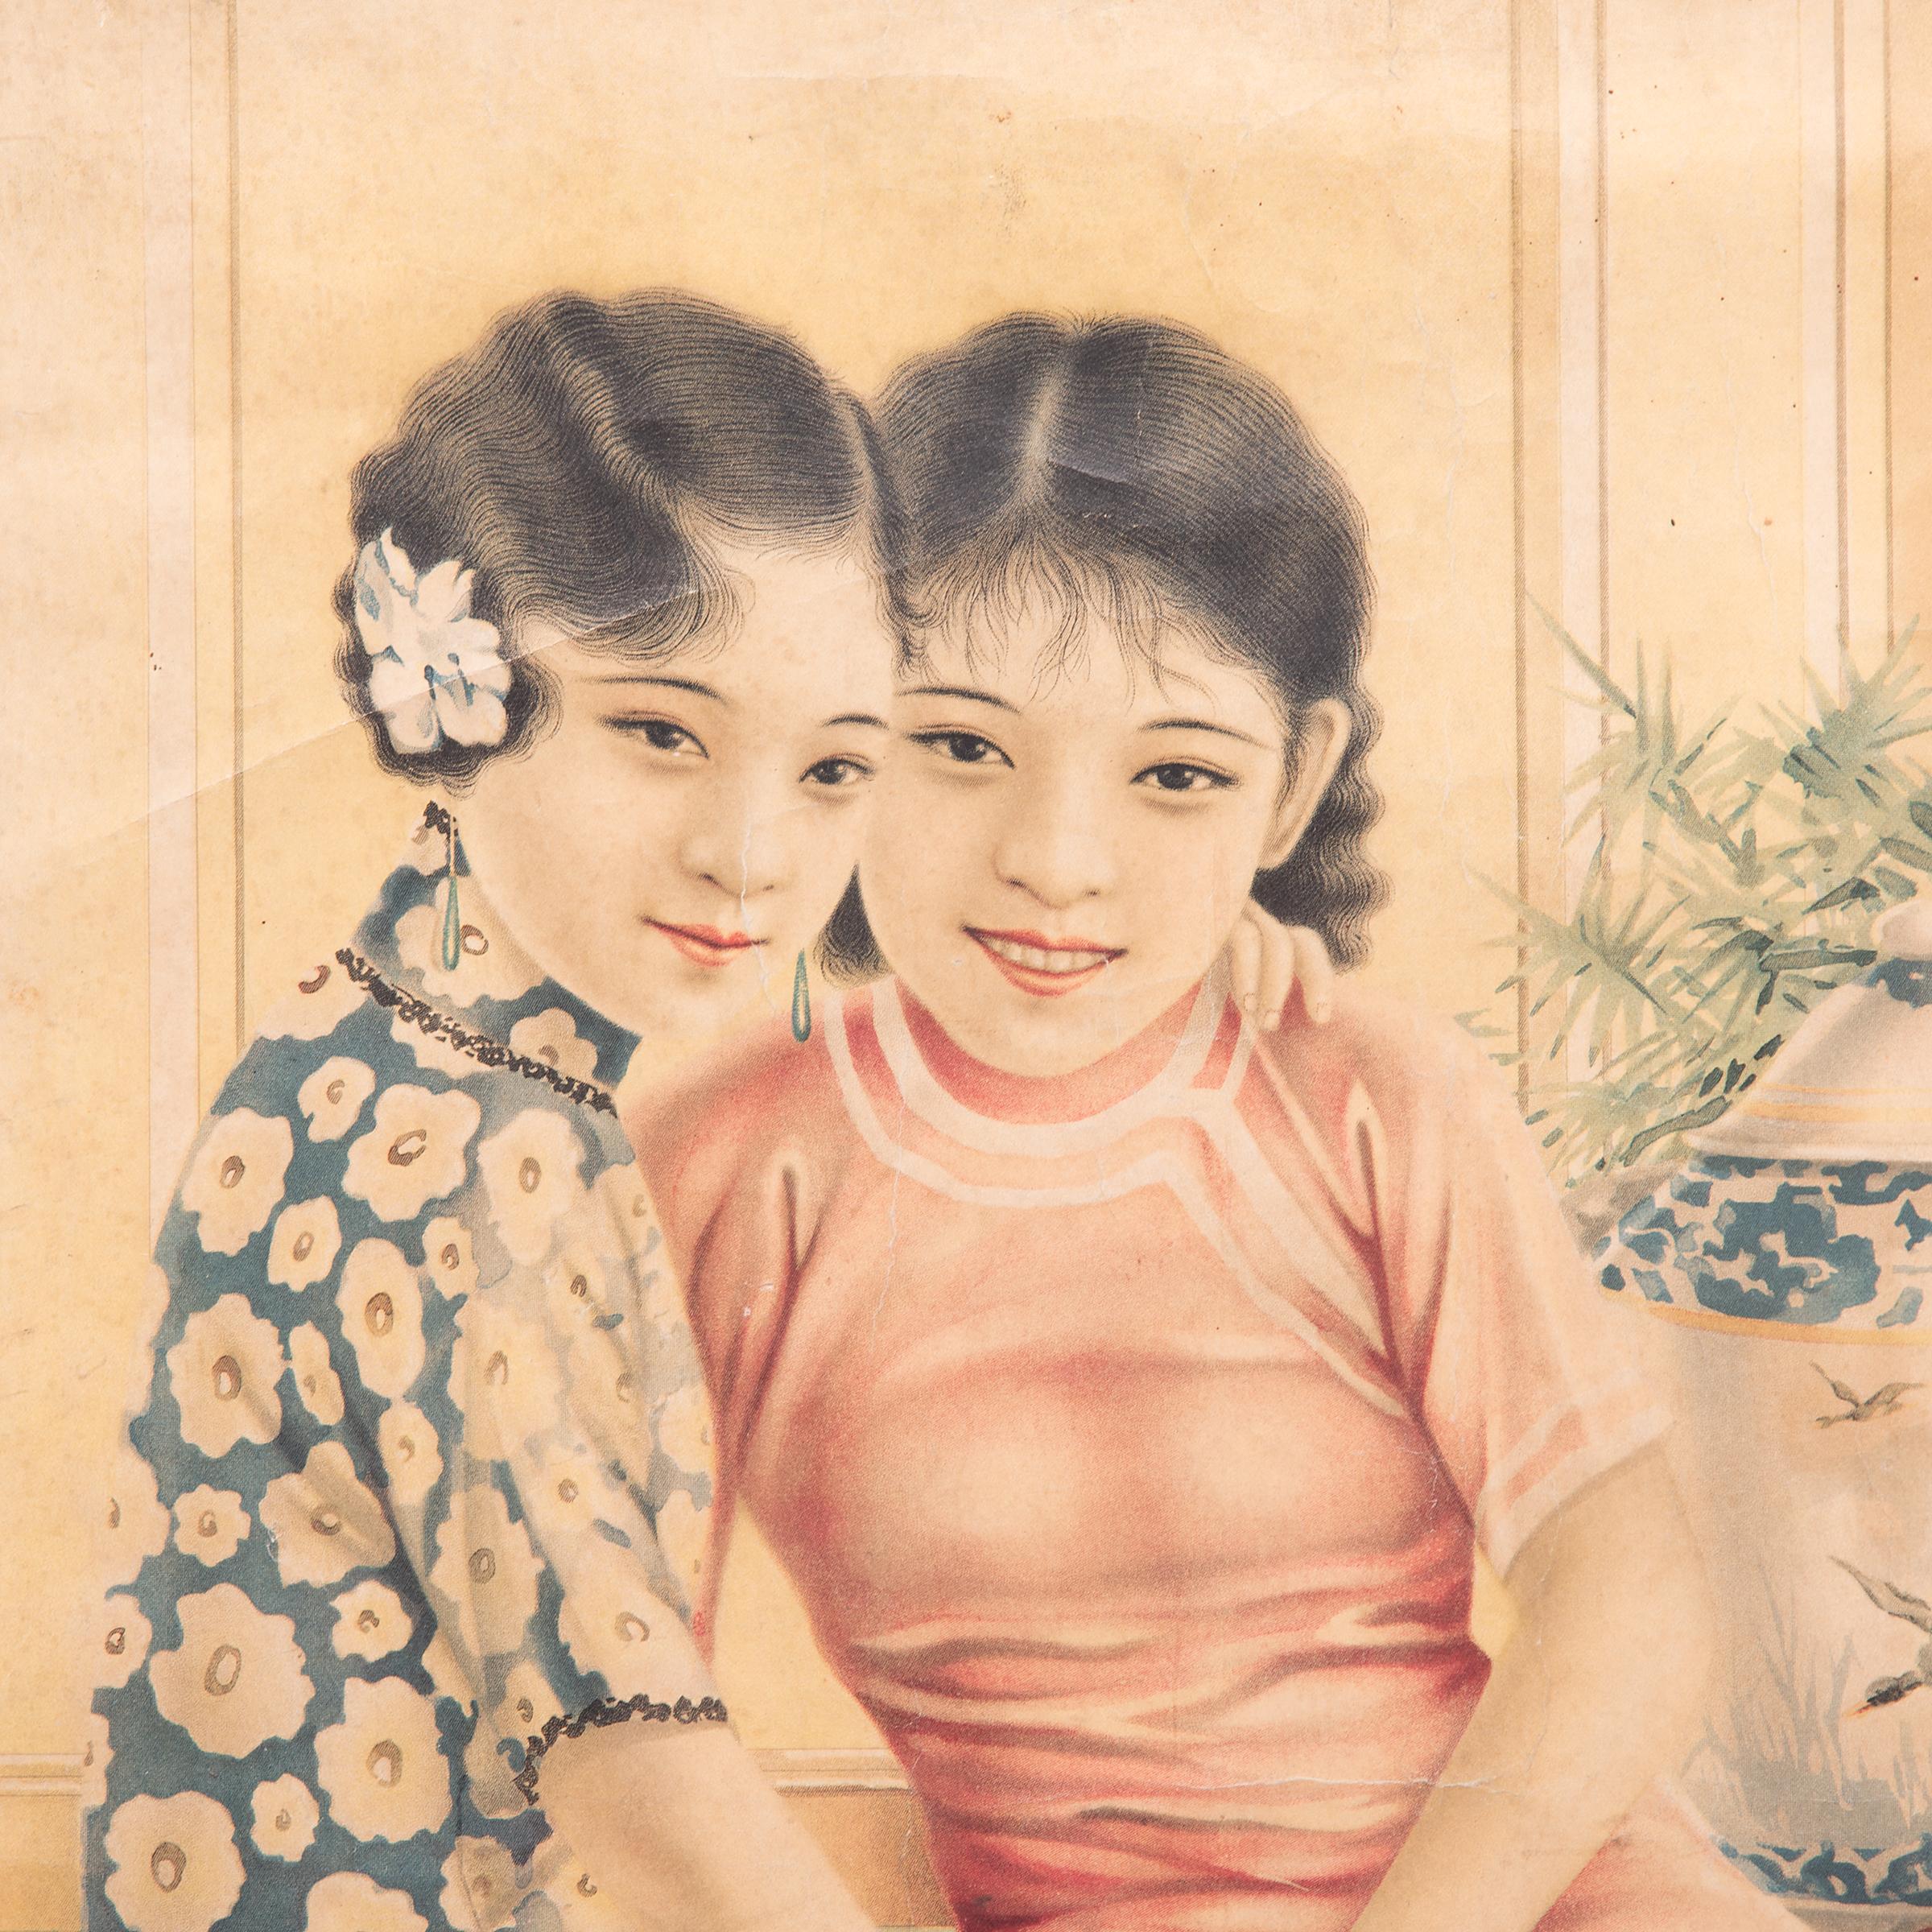 This poster from the 1930s melds the meticulous detail of traditional Chinese painting with the craft of color lithography. The poster depicts two young girls sharing a stool, dressed in traditional qipaos, but with Western hairstyles and shoes. The